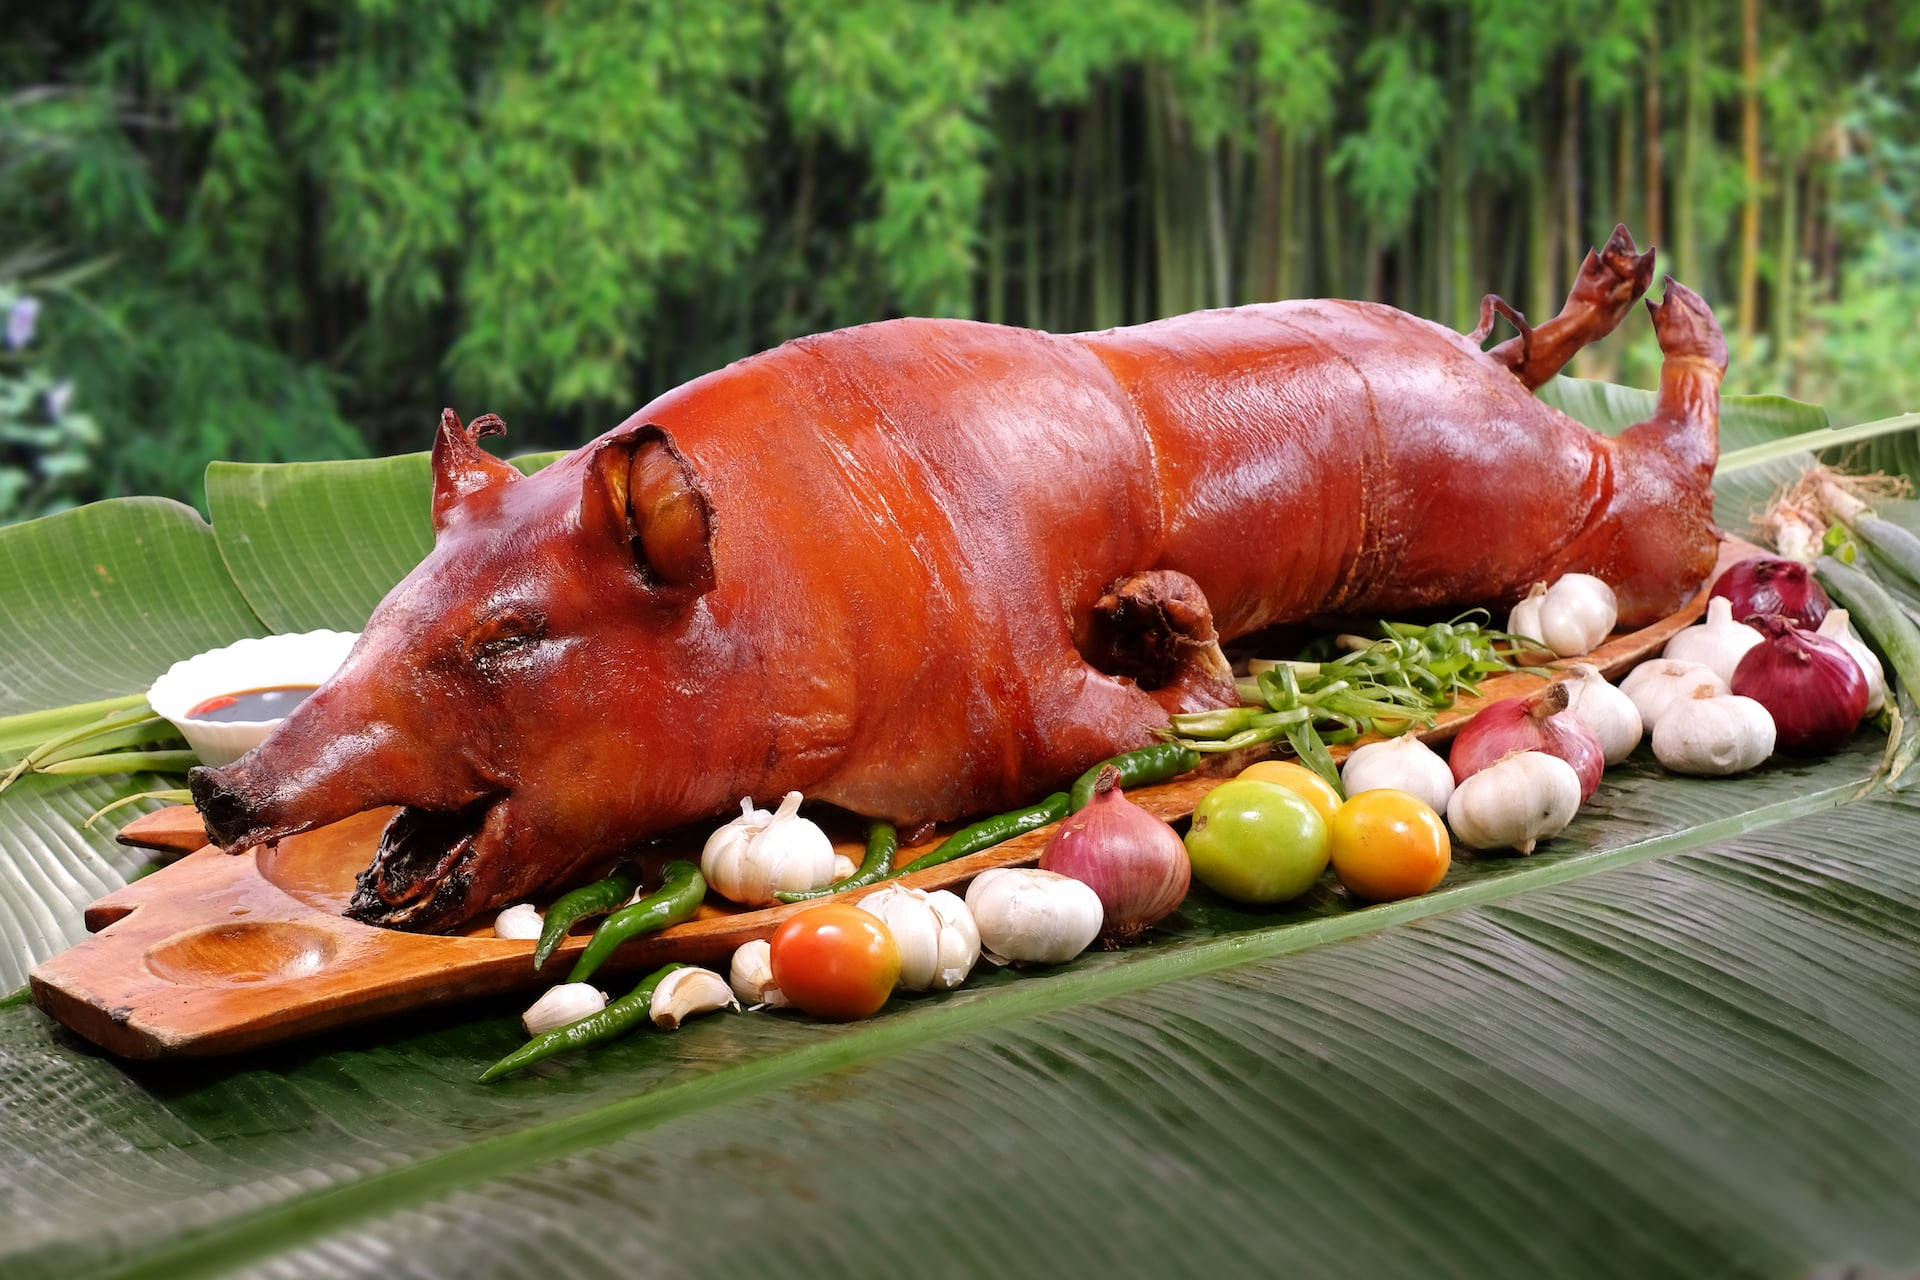 Lechonboodle Fight Cannot Be Directly Translated Into German Because It Is A Filipino Term That Refers To A Feast Where People Gather Around A Long Table To Eat Traditional Filipino Food, Including Lechon (roast Pig). It Is Not Related To Computer Or Mobile Wallpaper. Wallpaper